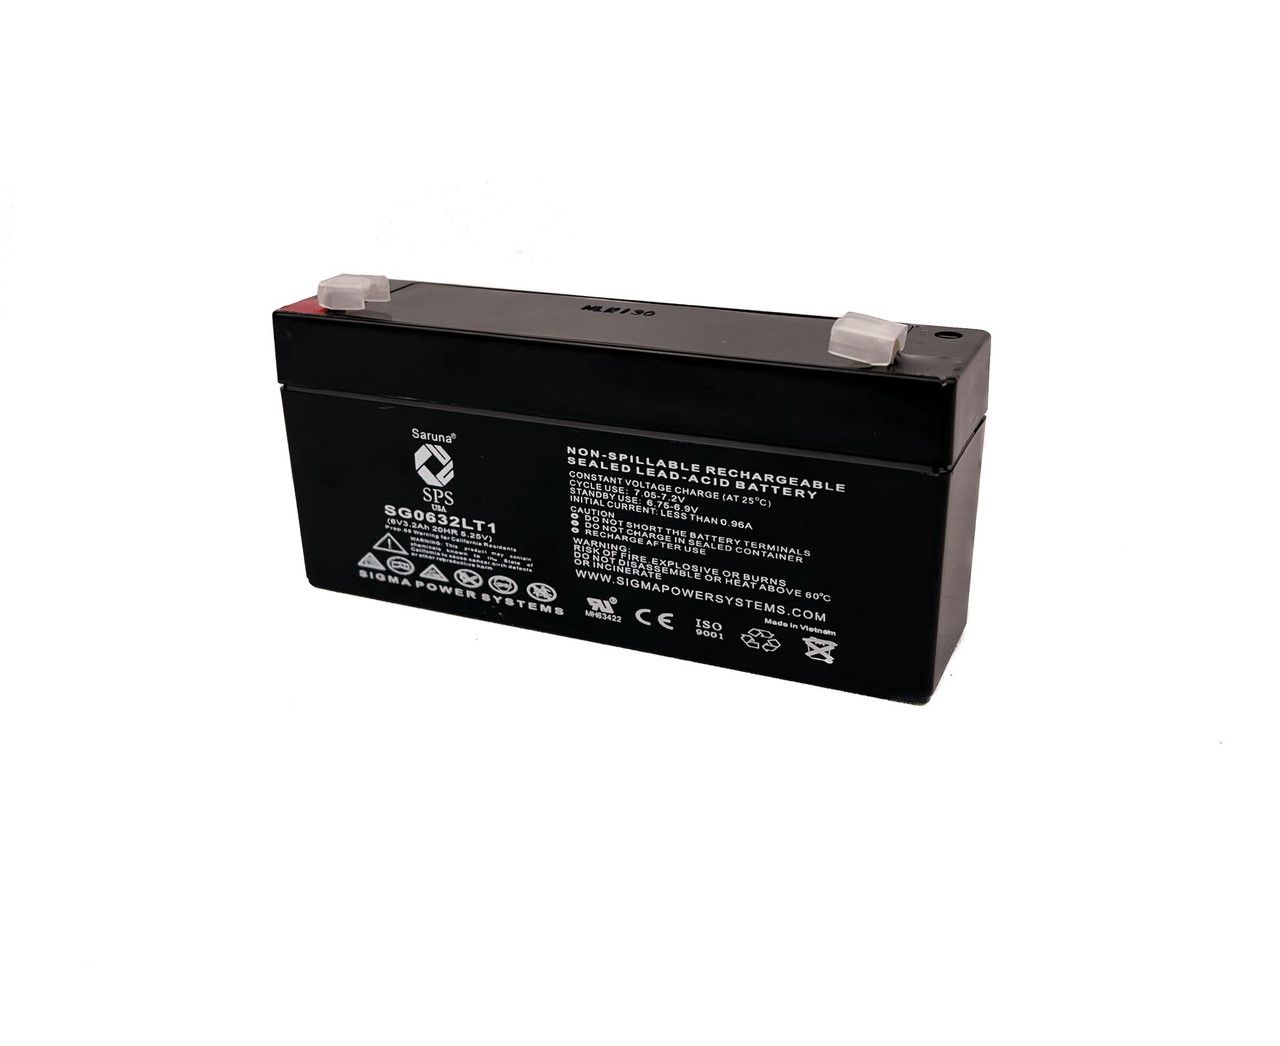 Raion Power 6V 3.2Ah Non-Spillable Replacement Rechargebale Battery for NERBO NB 3.2-6